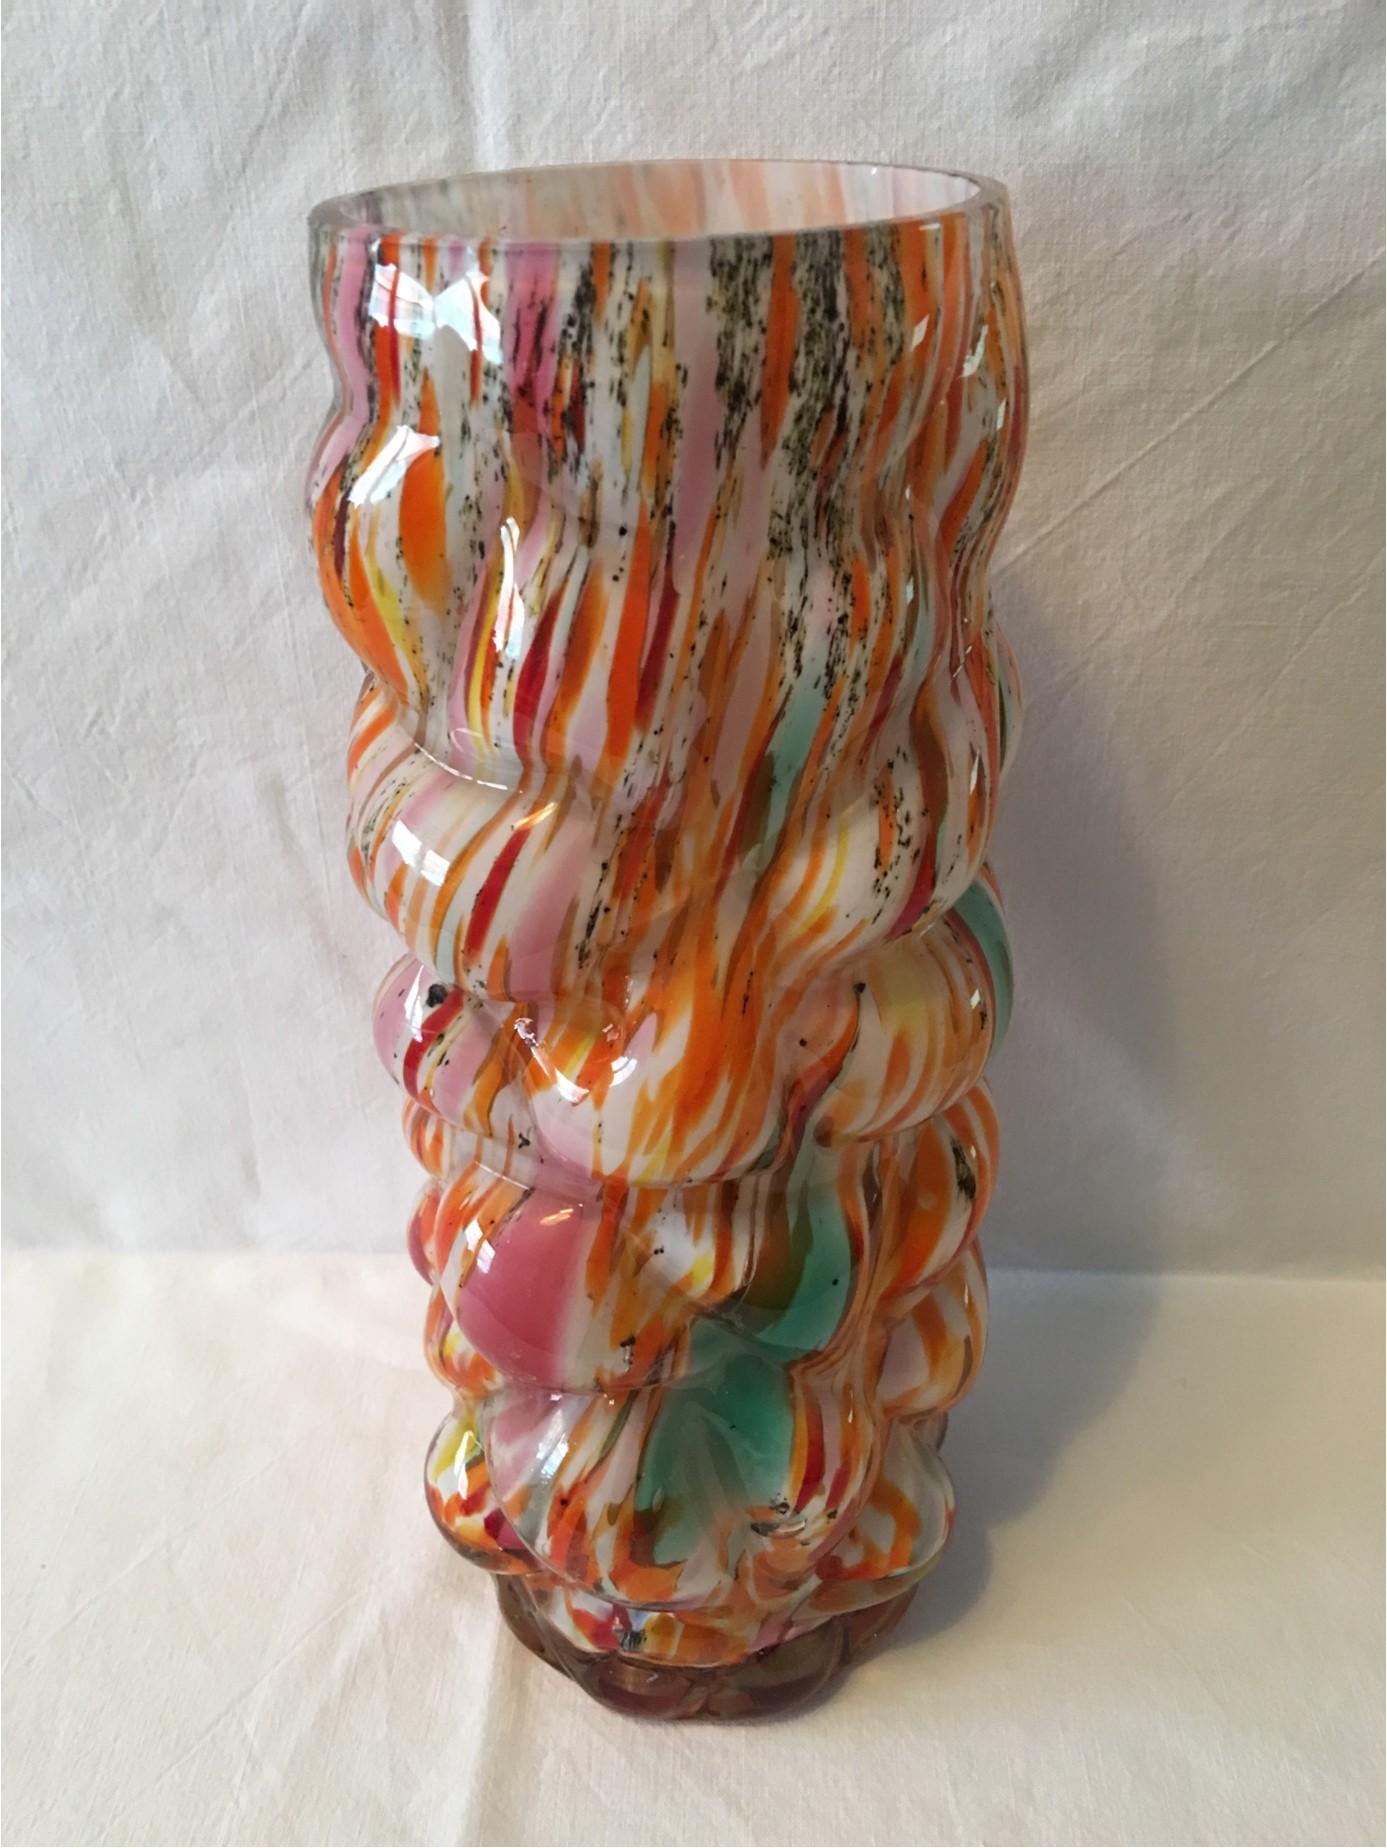 Multi-Color Hand Blown Murano Glass Vase from 1960s Italy (Italienisch) im Angebot